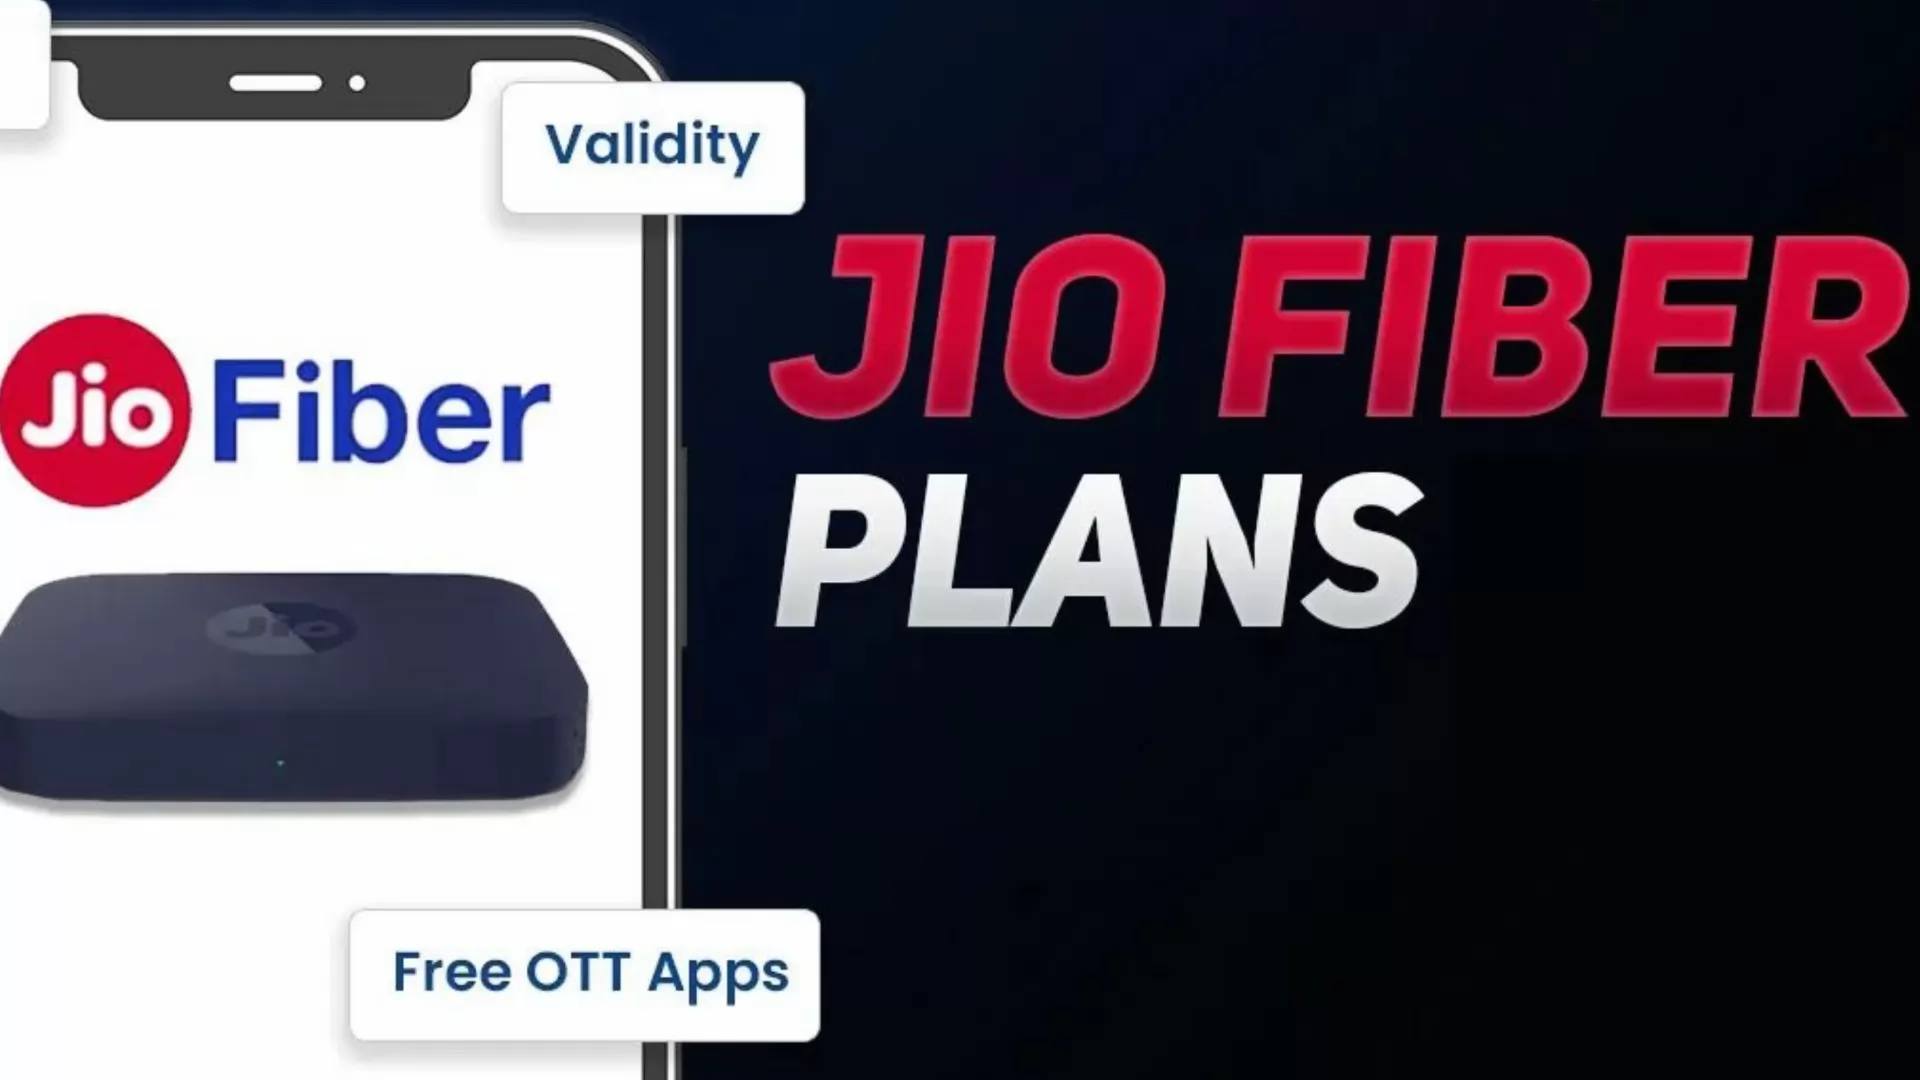 how to watch SonyLiv for free - Through Jio Fiber Plans